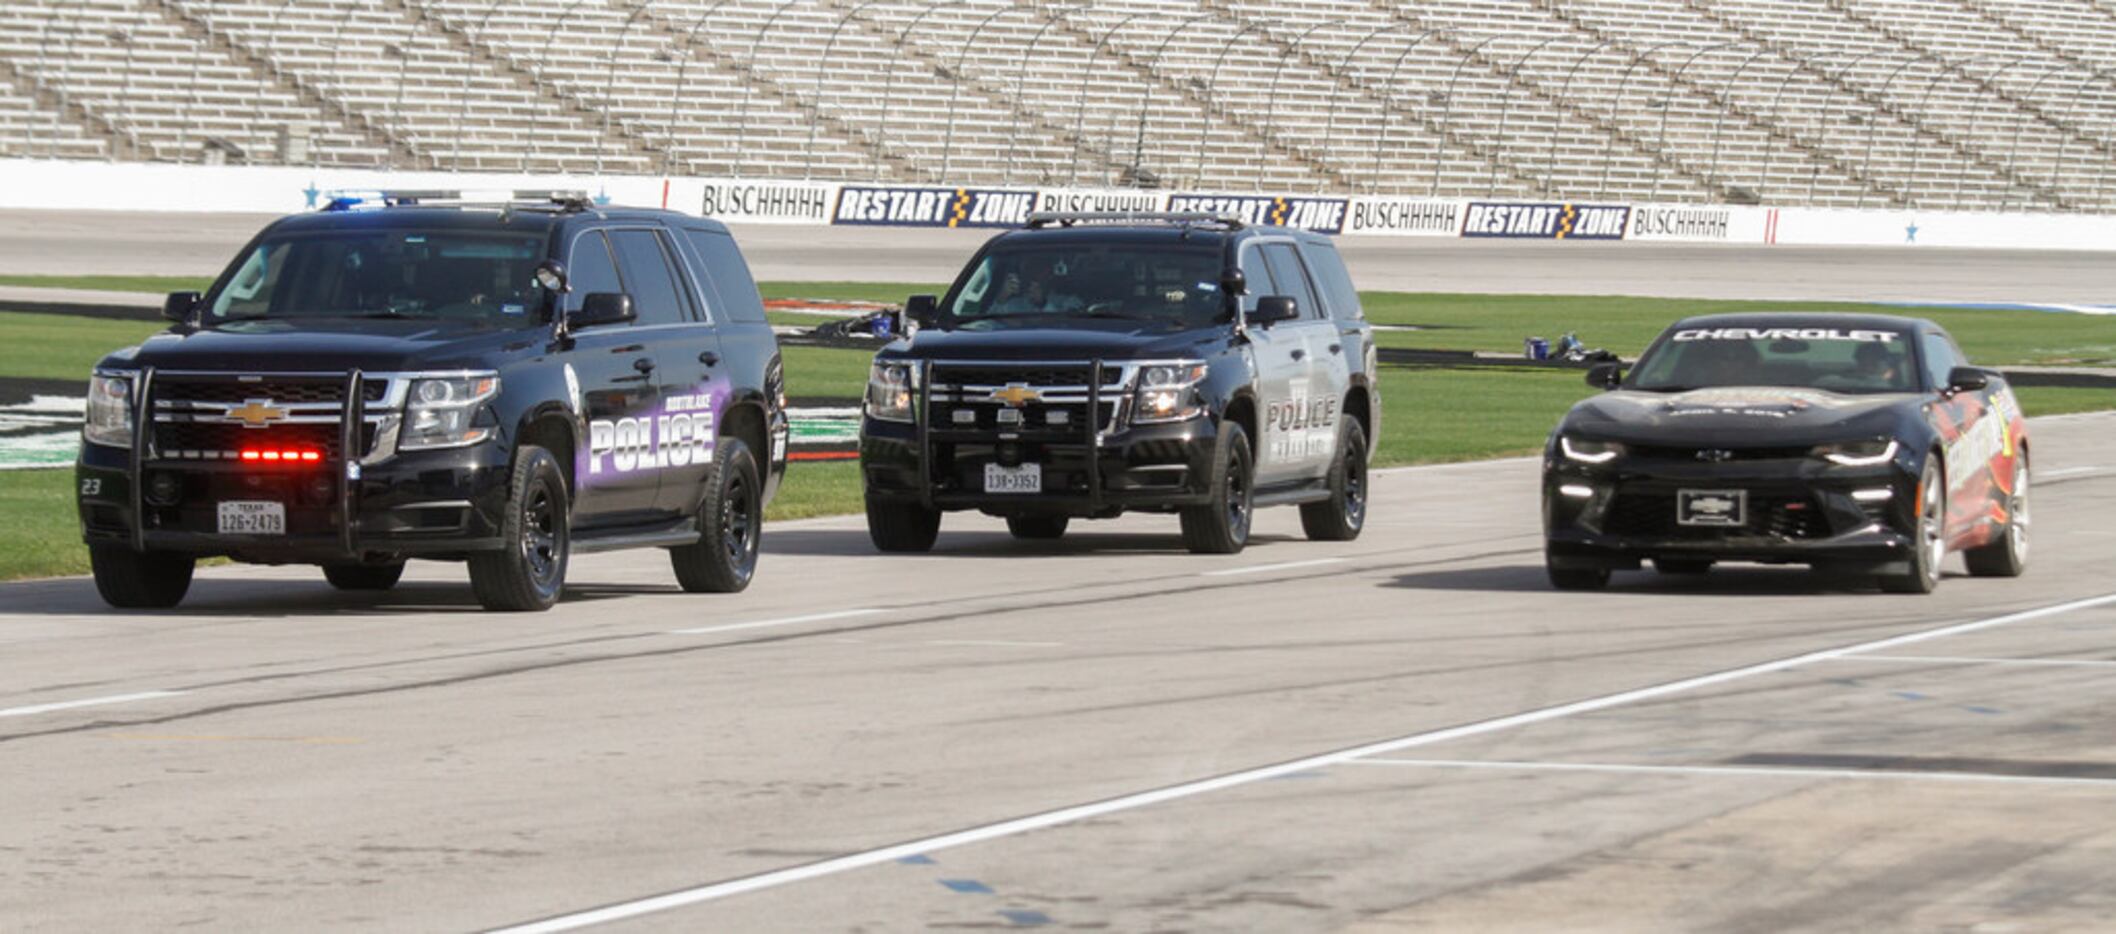 Jared Leto has a police escort as he stops by the Texas Motor Speedway in Fort Worth...